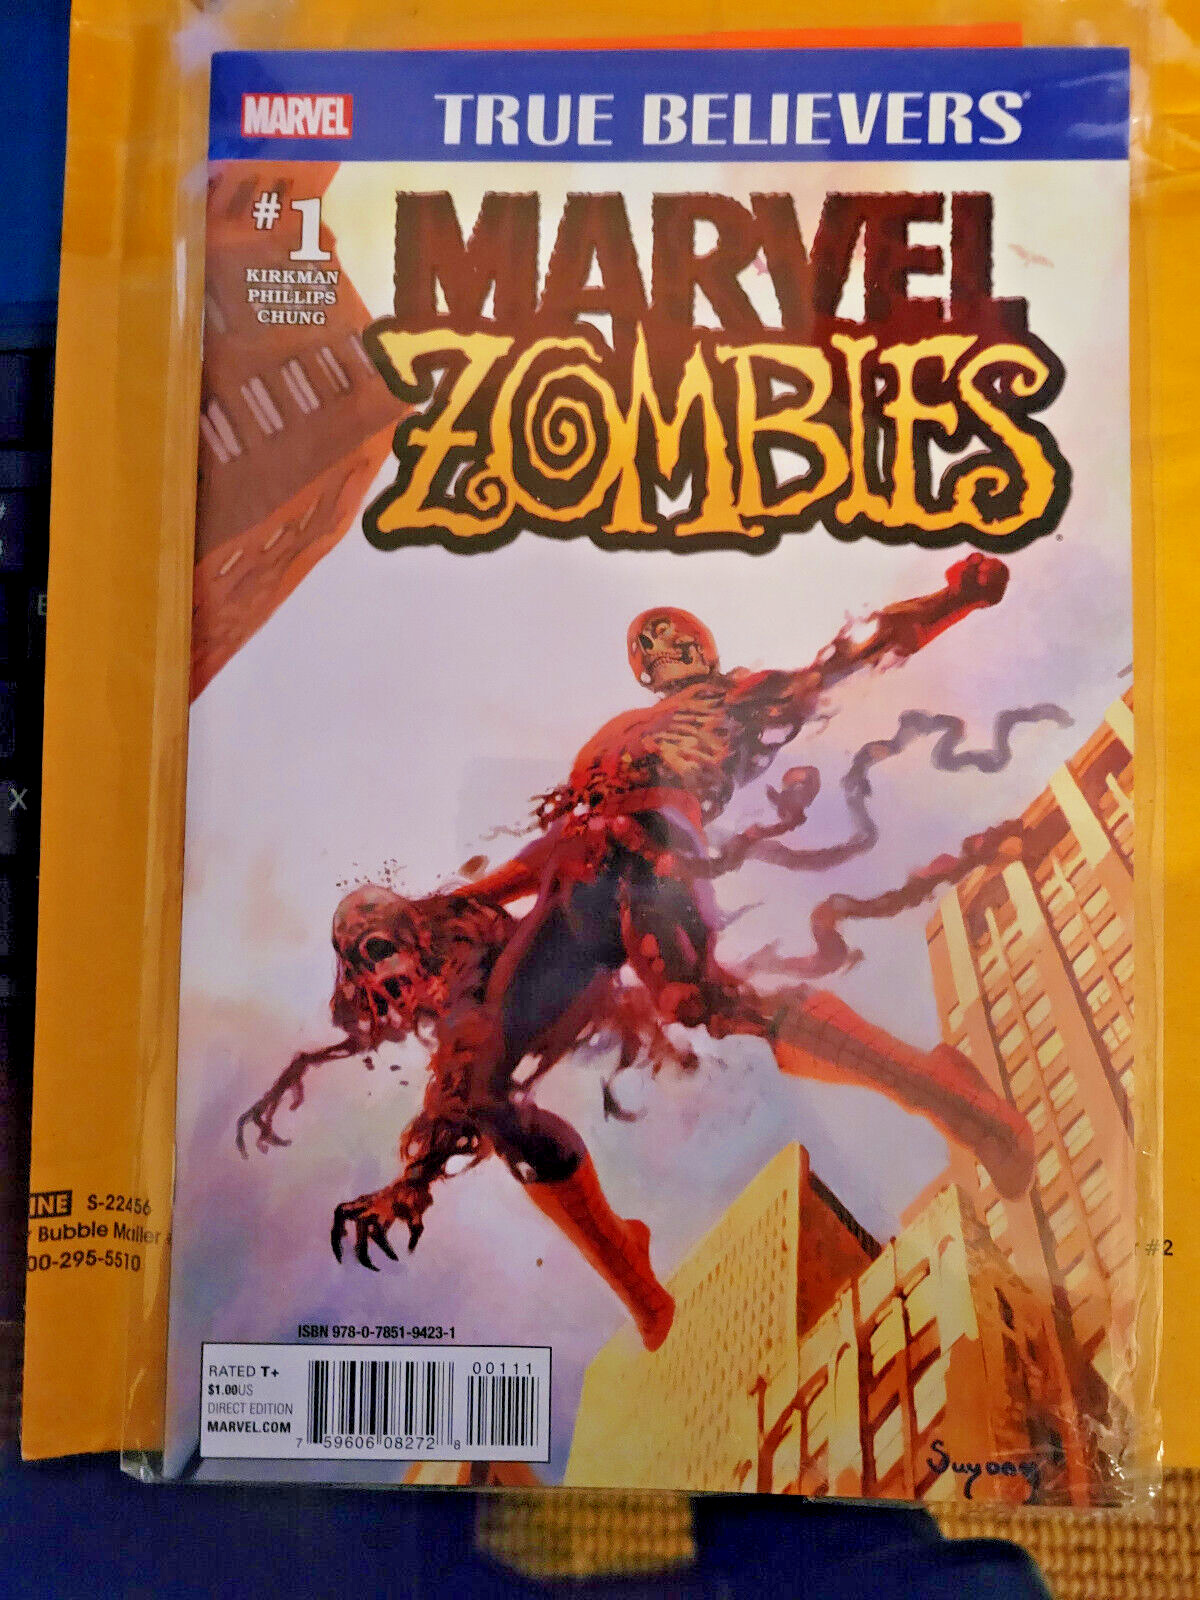 Marvel Comics #1 TRUE BELIEVERS Marvel Zombies DIRECT EDITION - SEALED